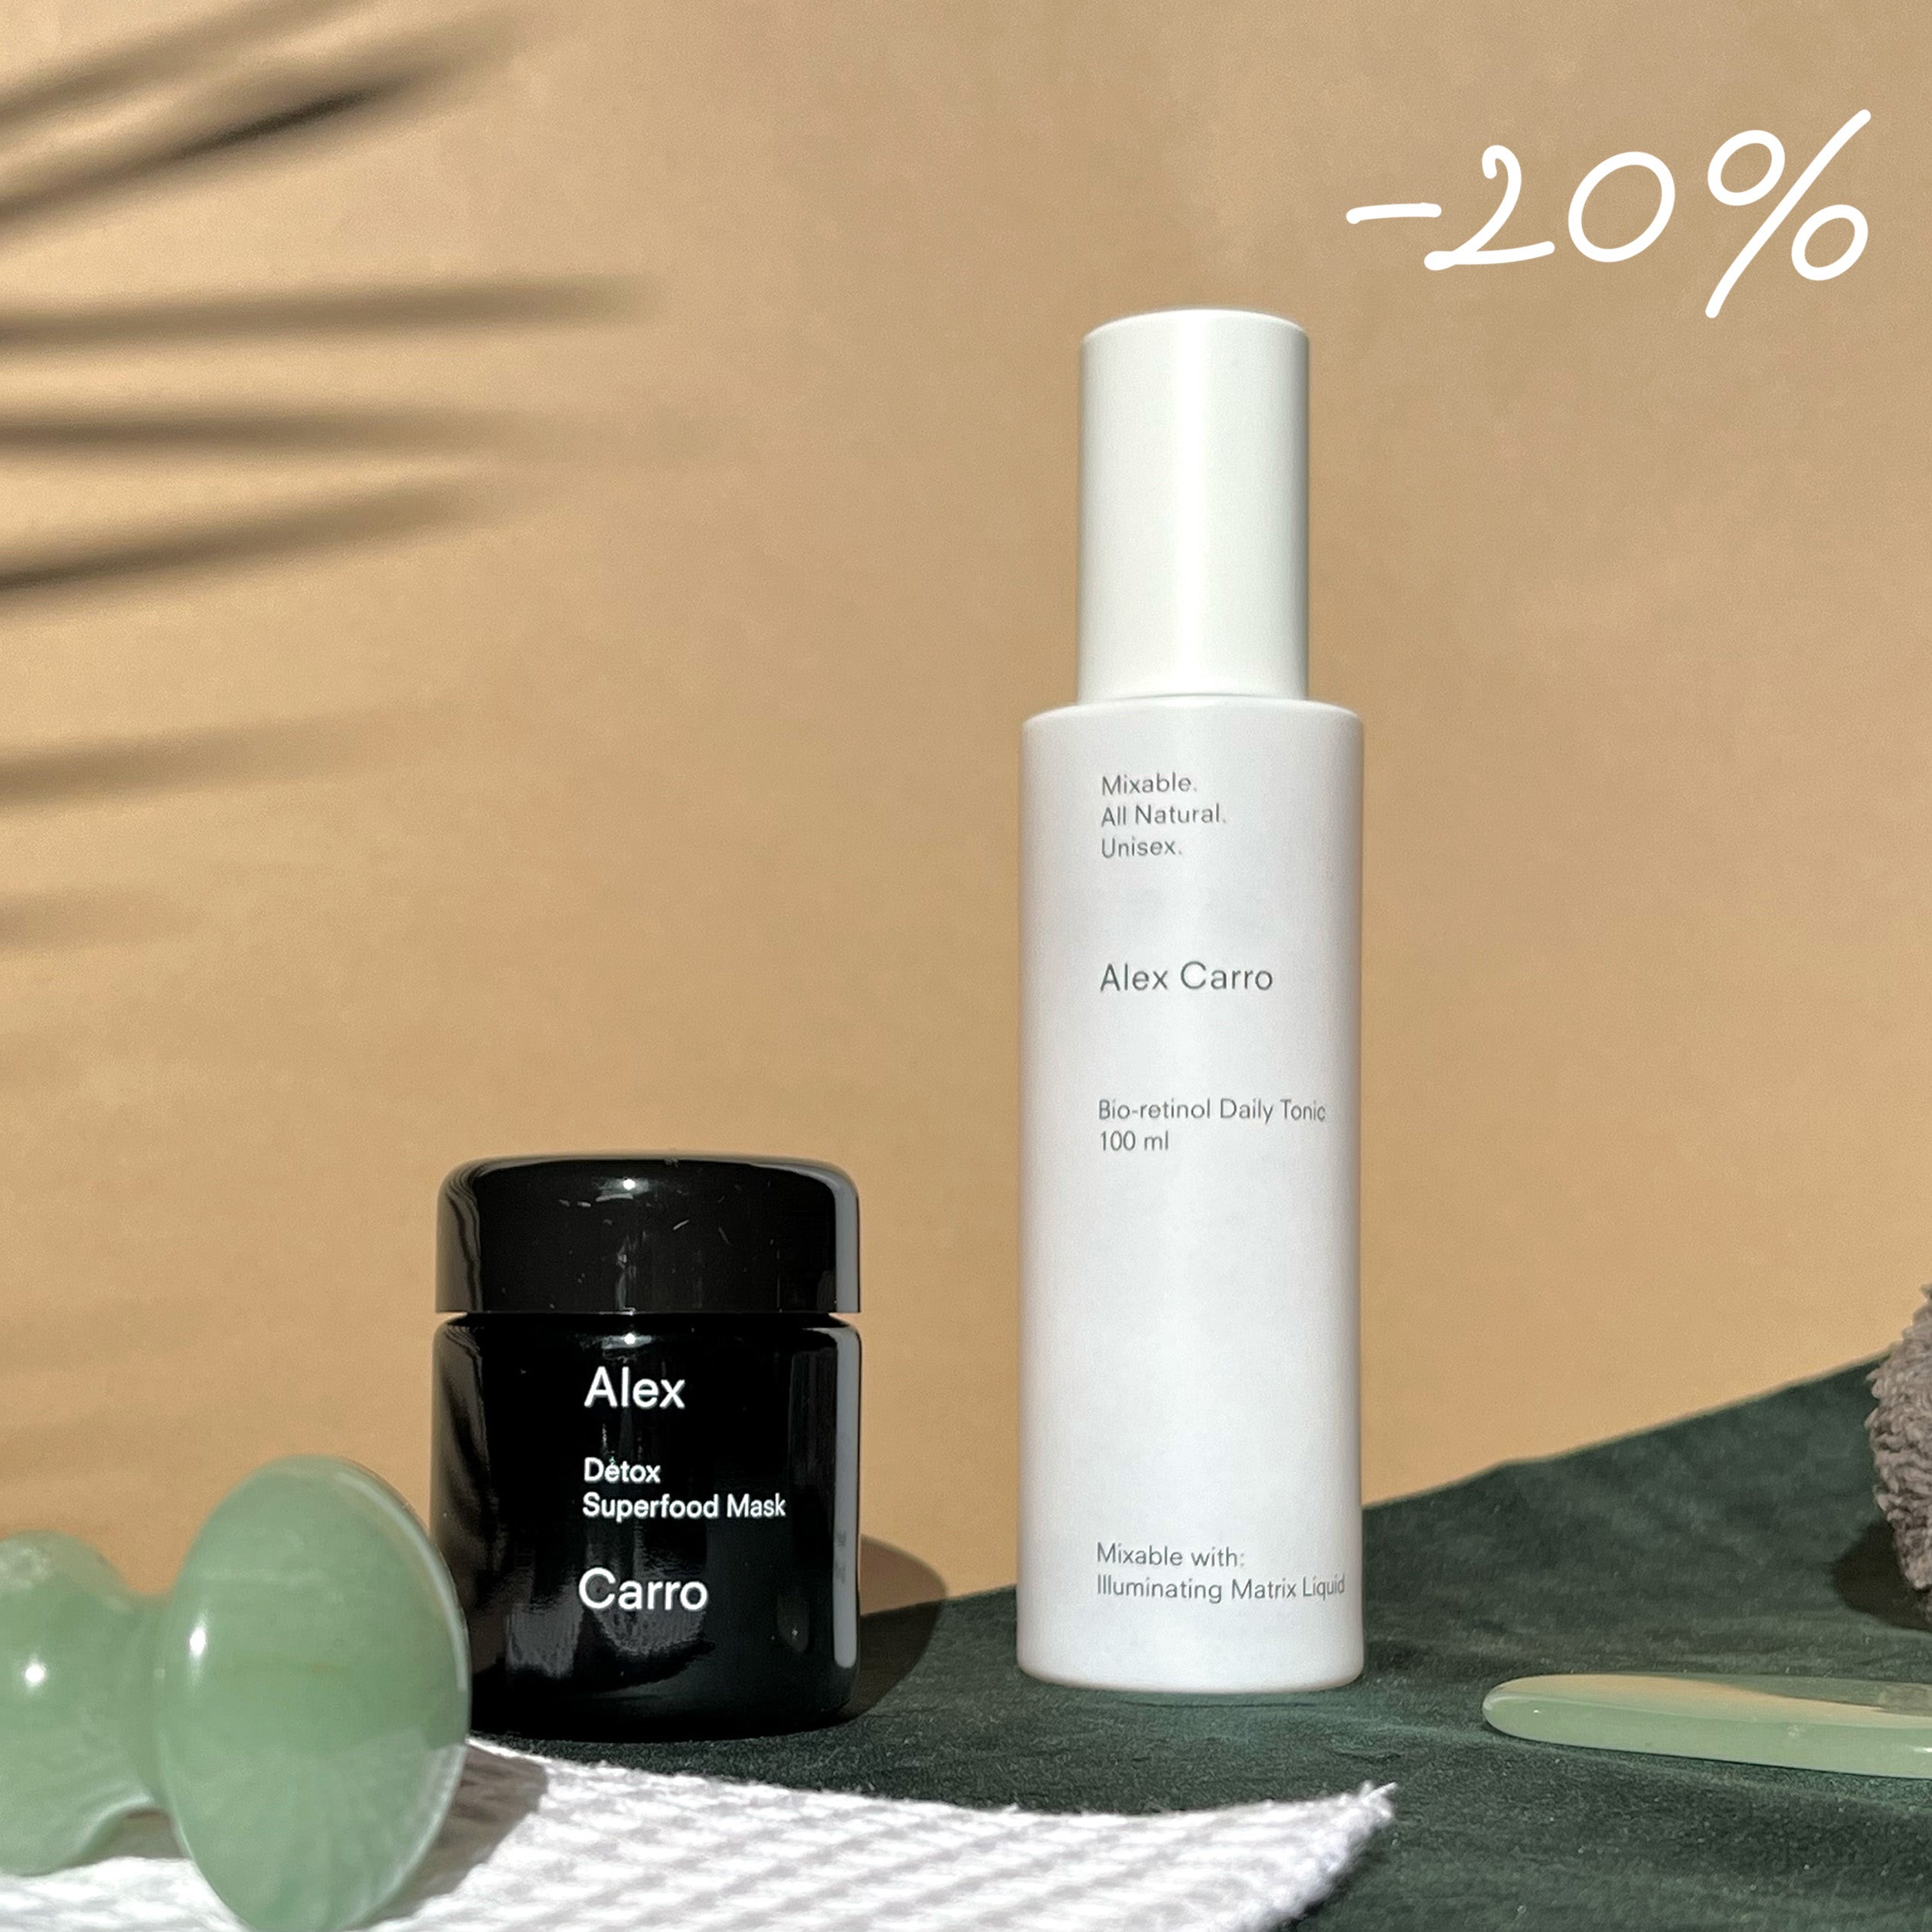 The Facialist Duo (save 26€)